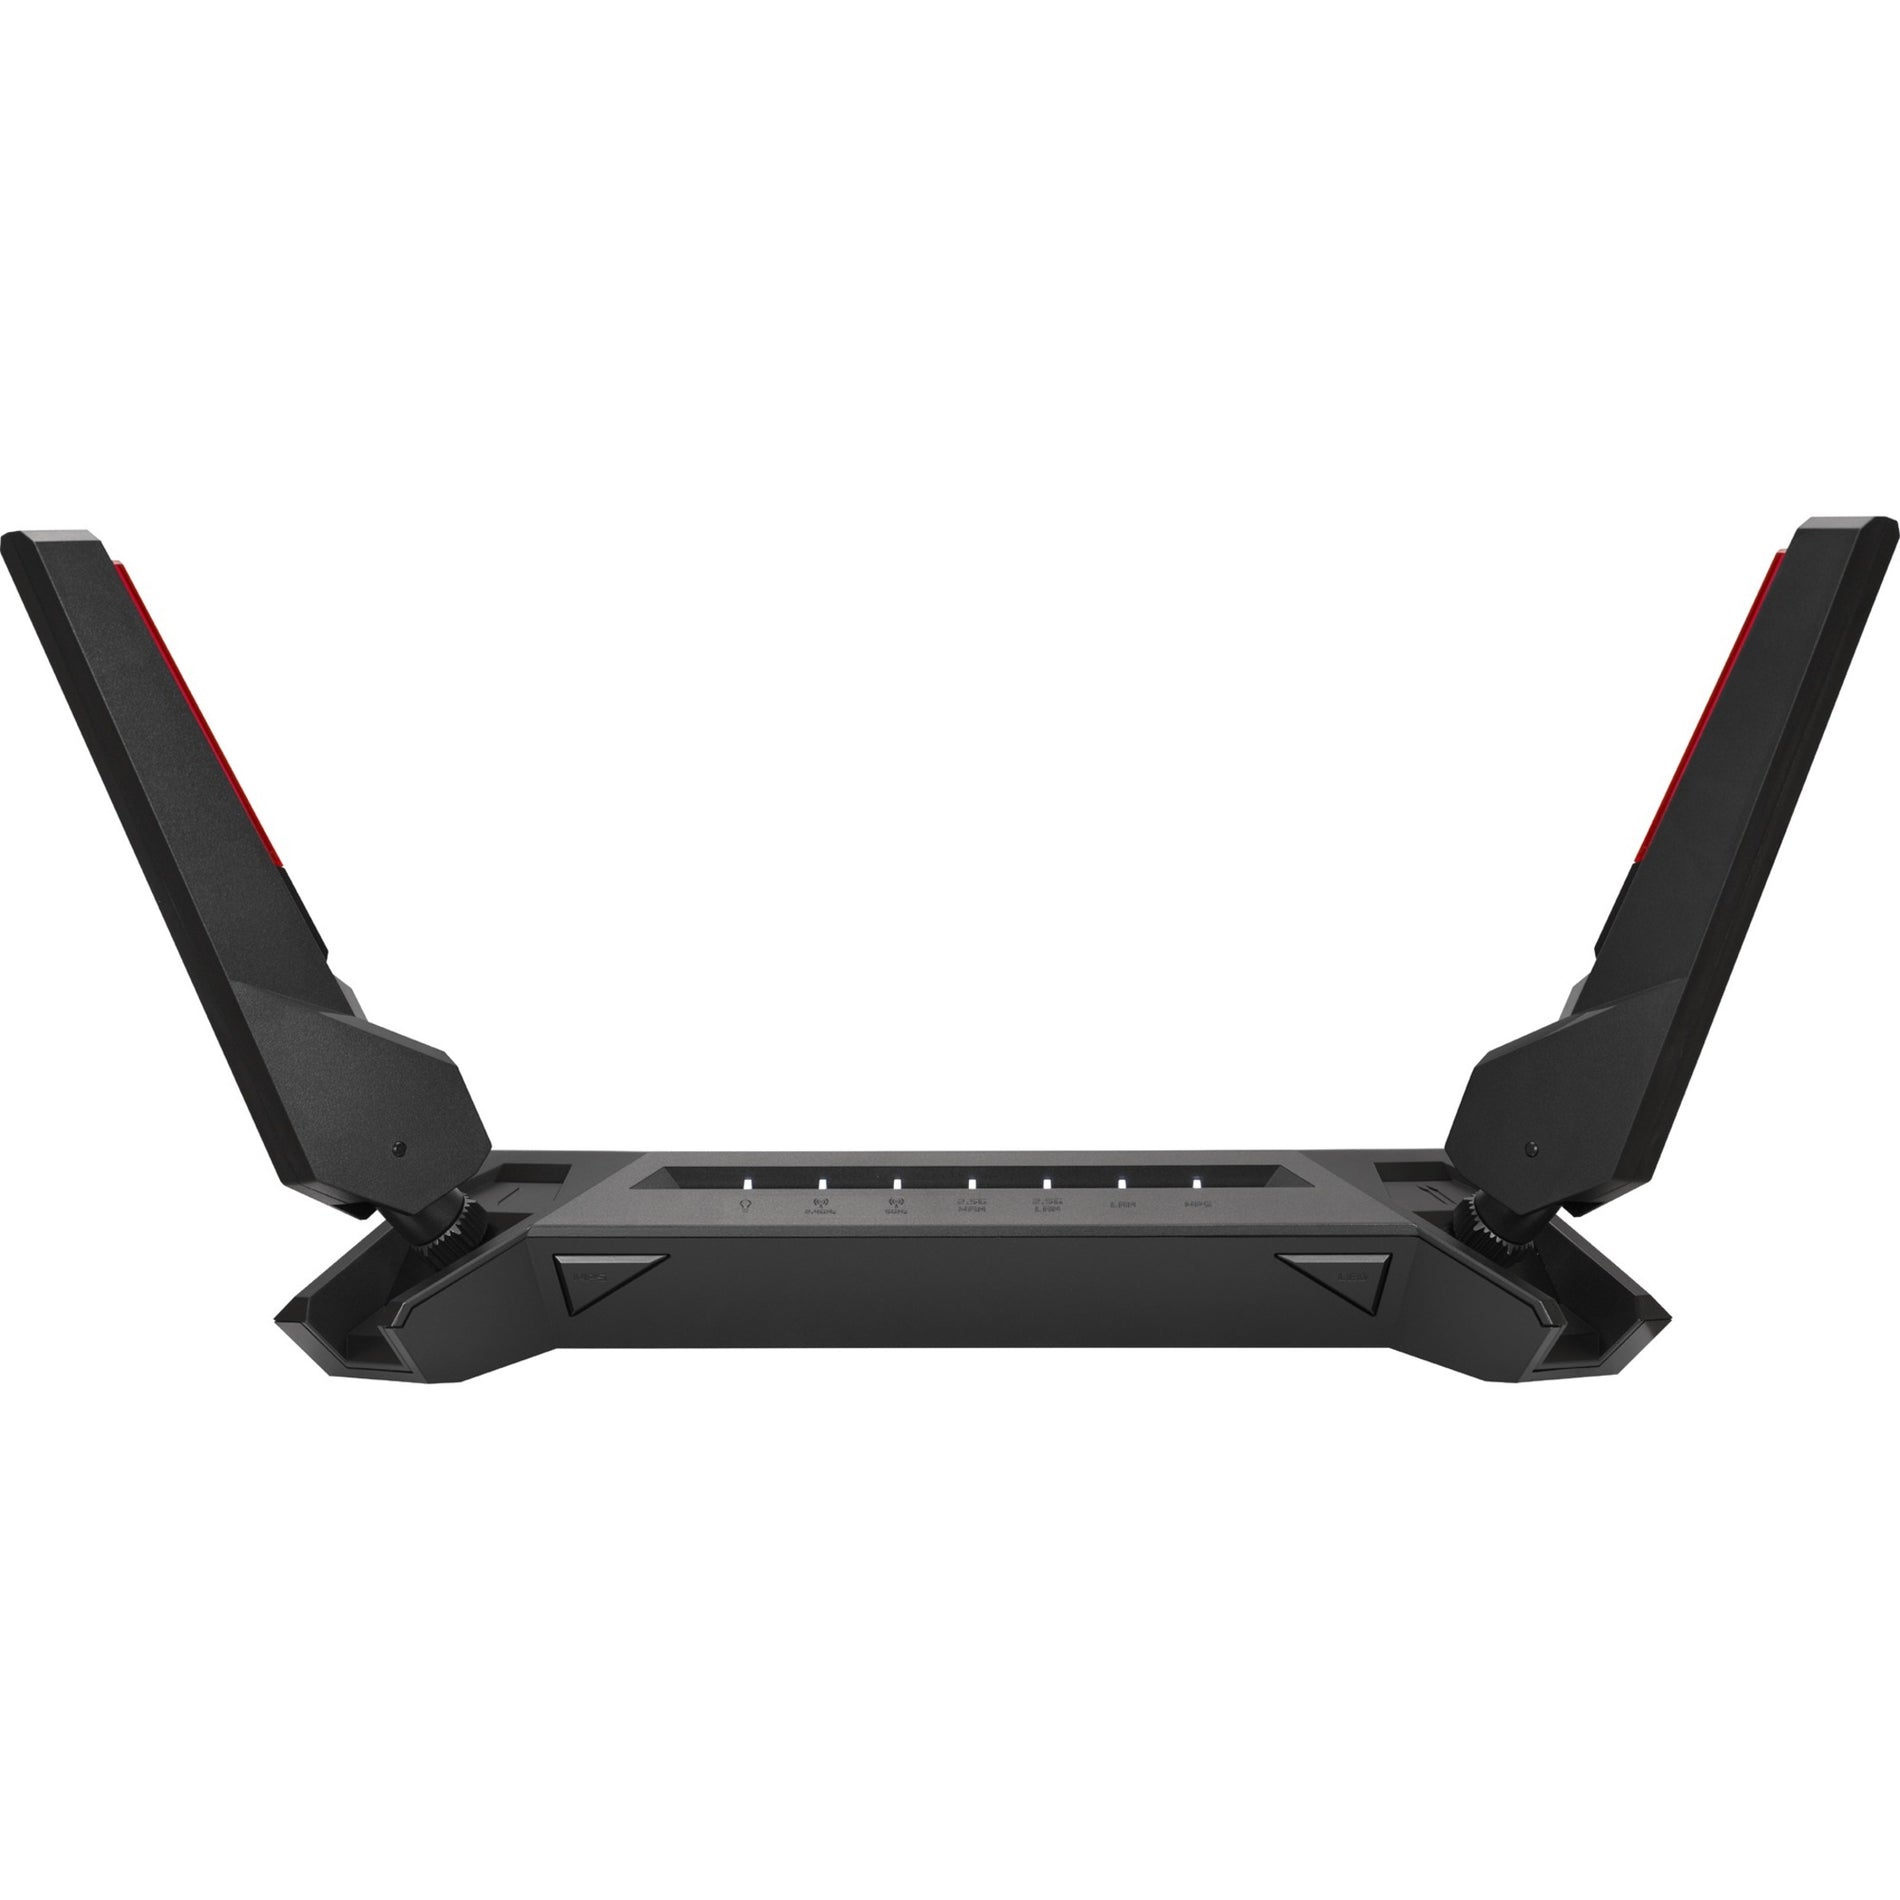 Asus ROG GT-AX6000 Rapture Wireless Router Wi-Fi 6 2.5 Gigabit Ethernet 744 MB/s